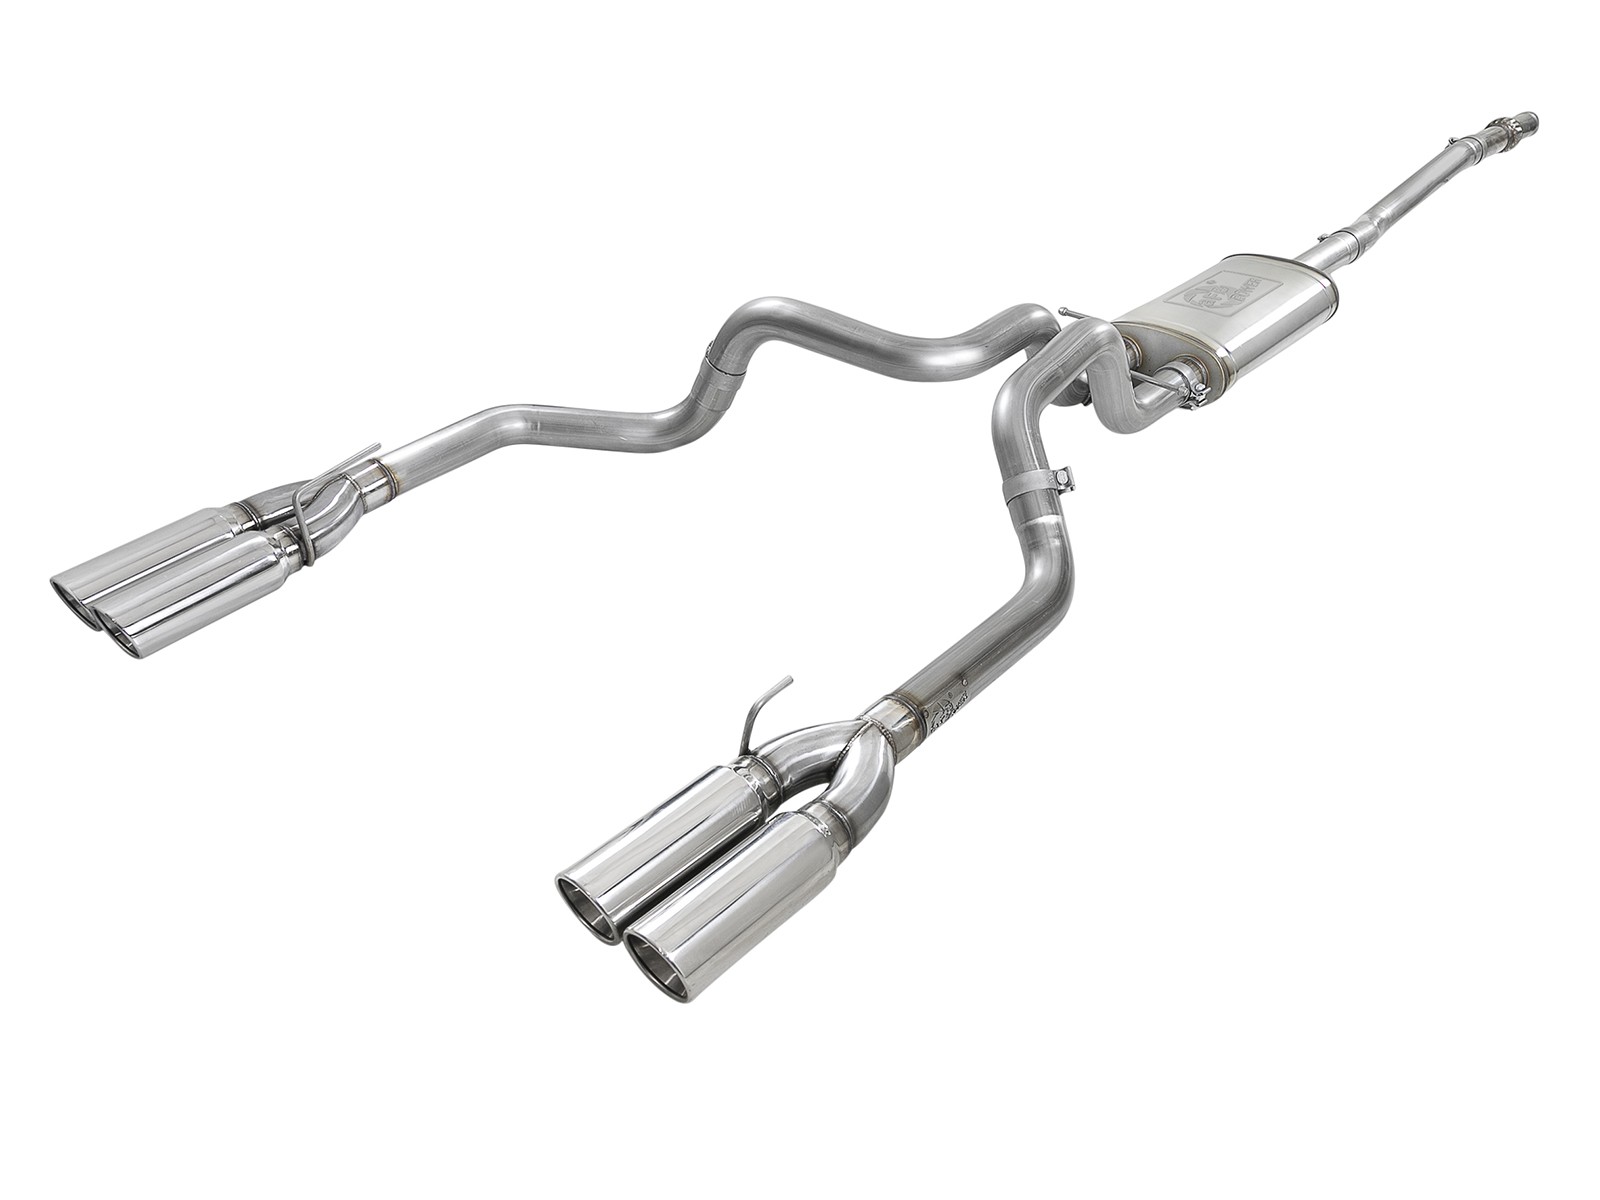 A cat-back style exhaust system